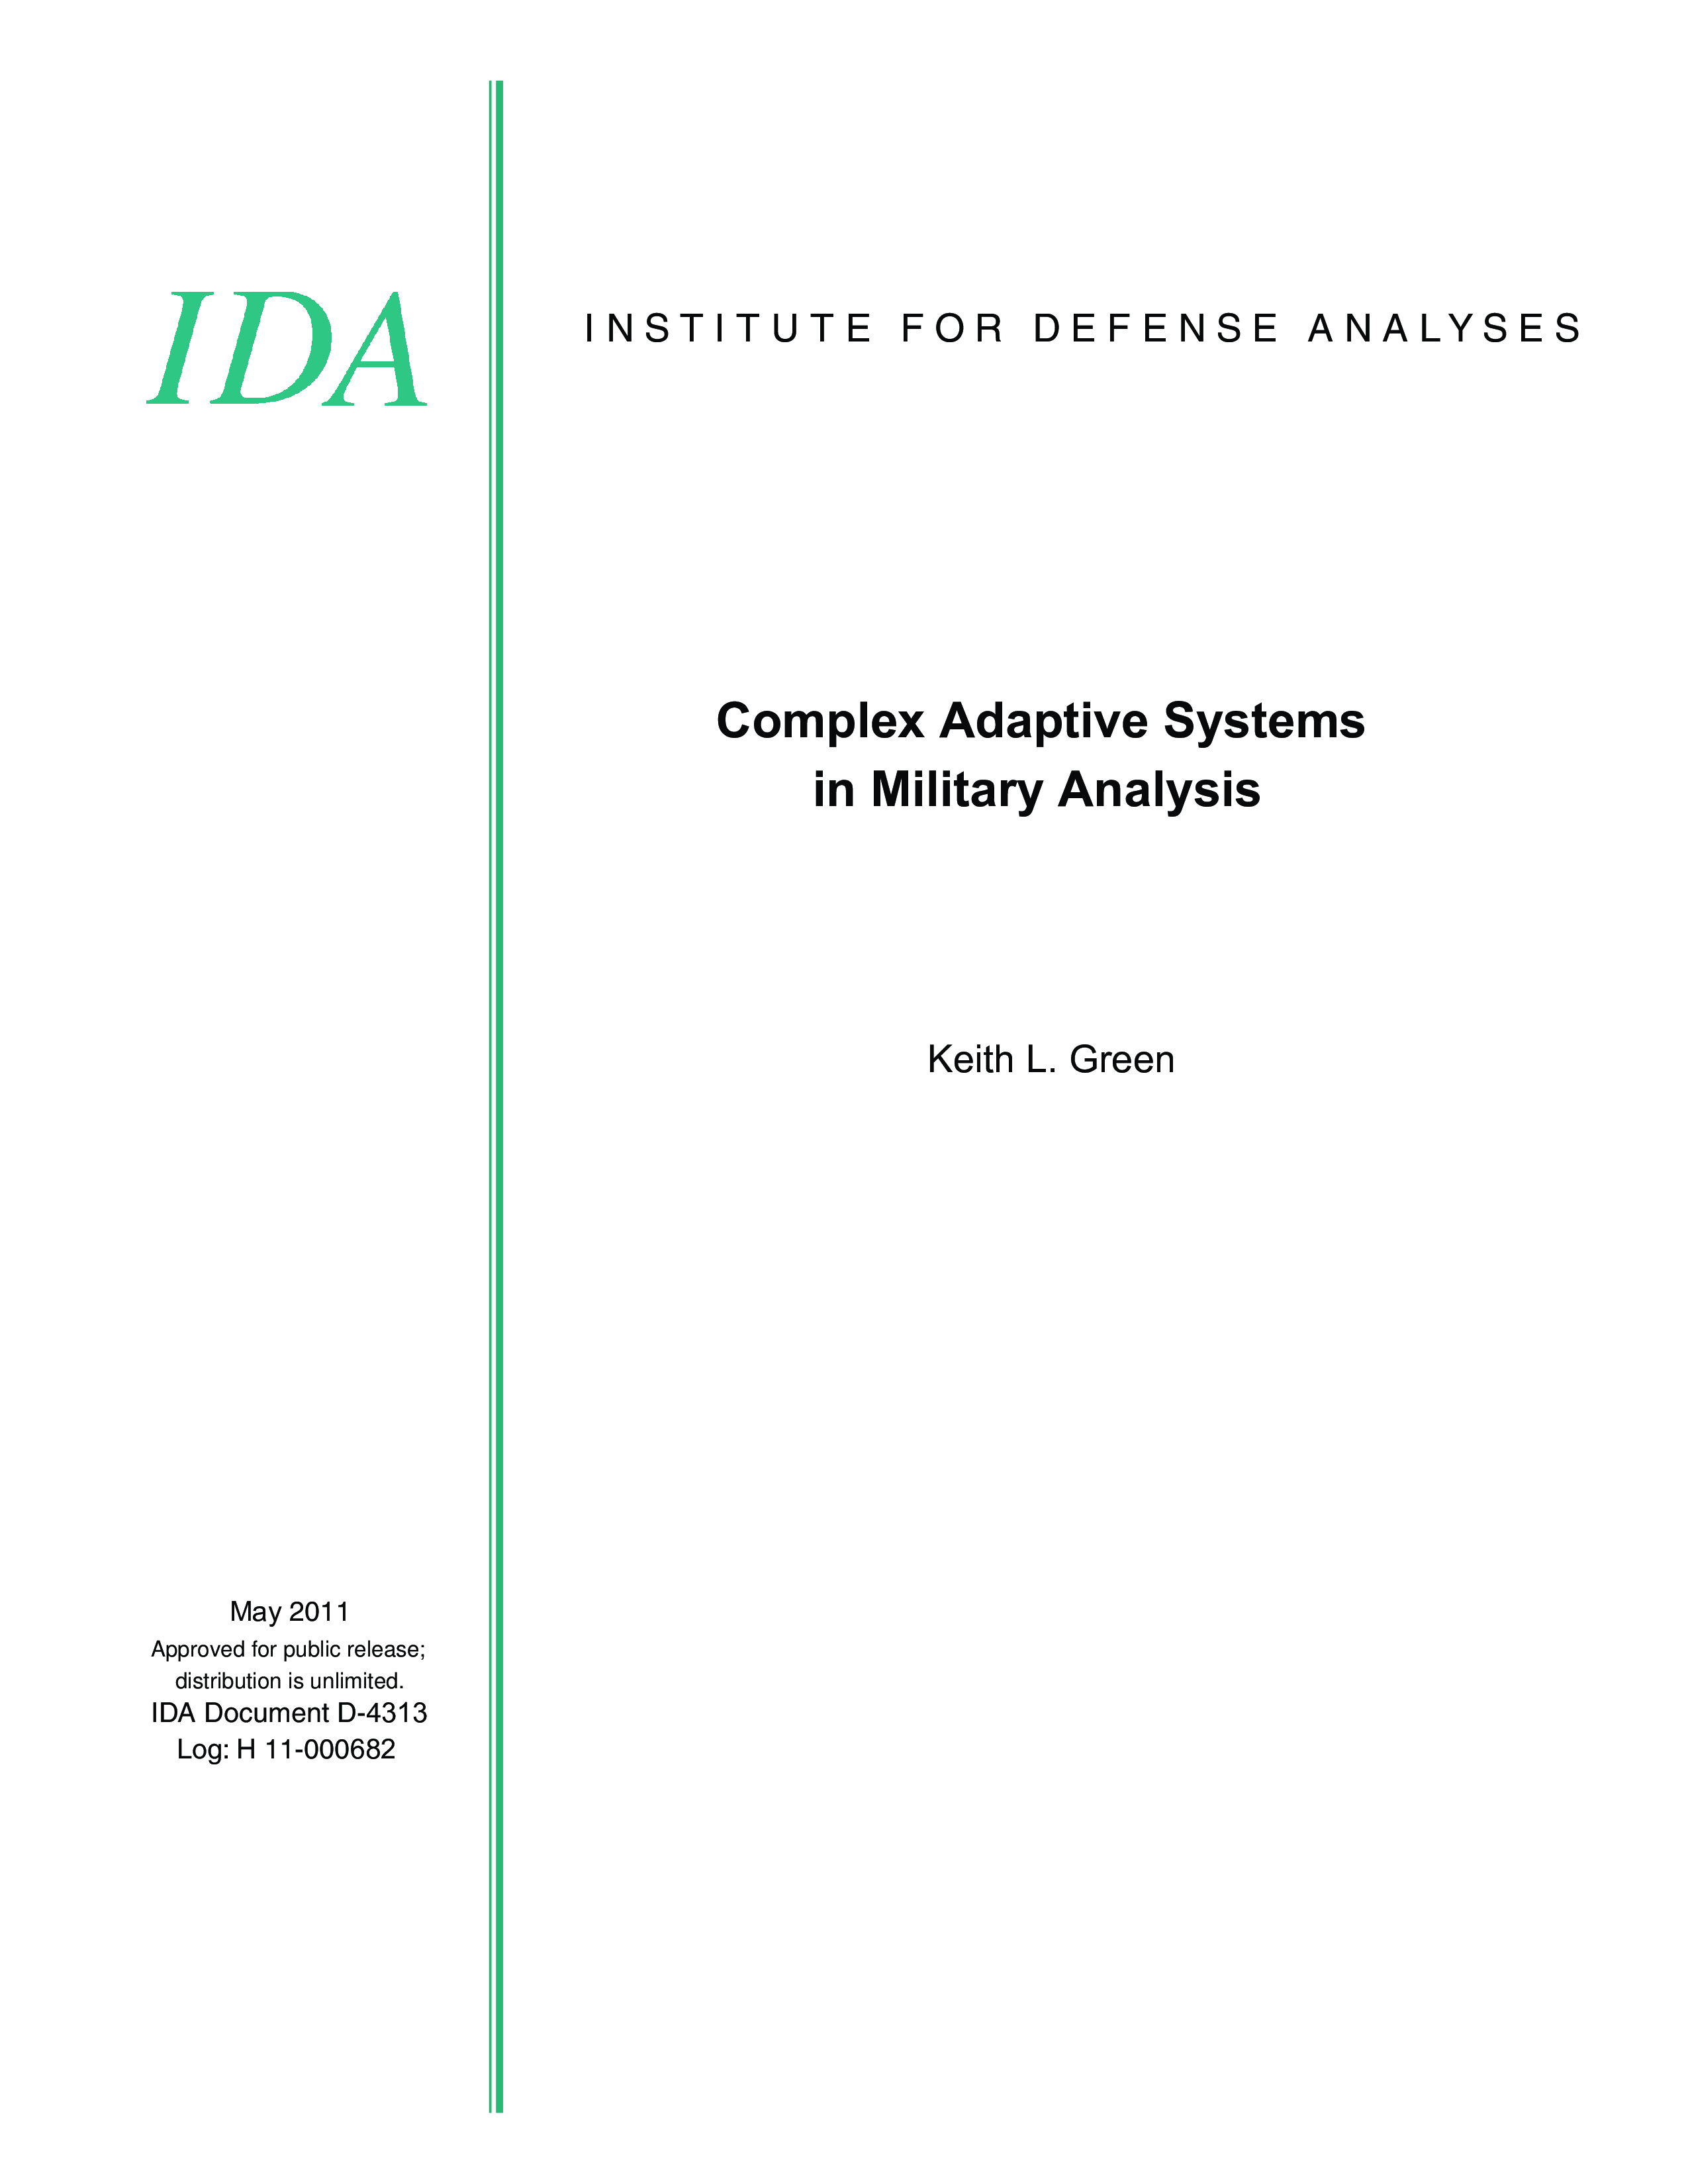 Complex Adaptive Systems in Military Analysis